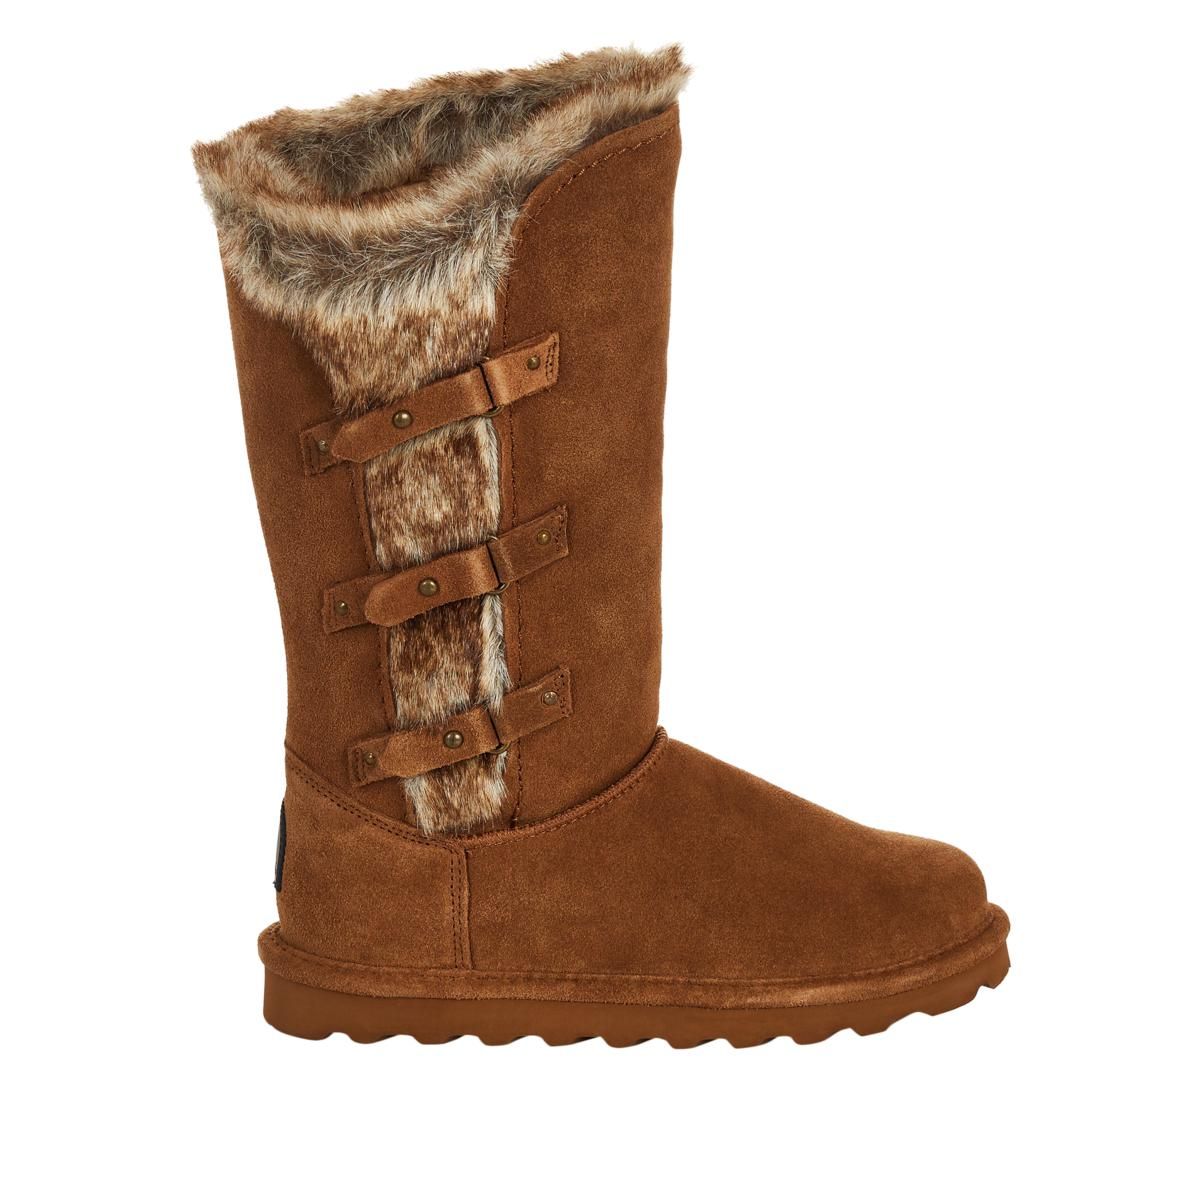 BEARPAW Emery Suede Water- and Stain-Repellent Boot | HSN